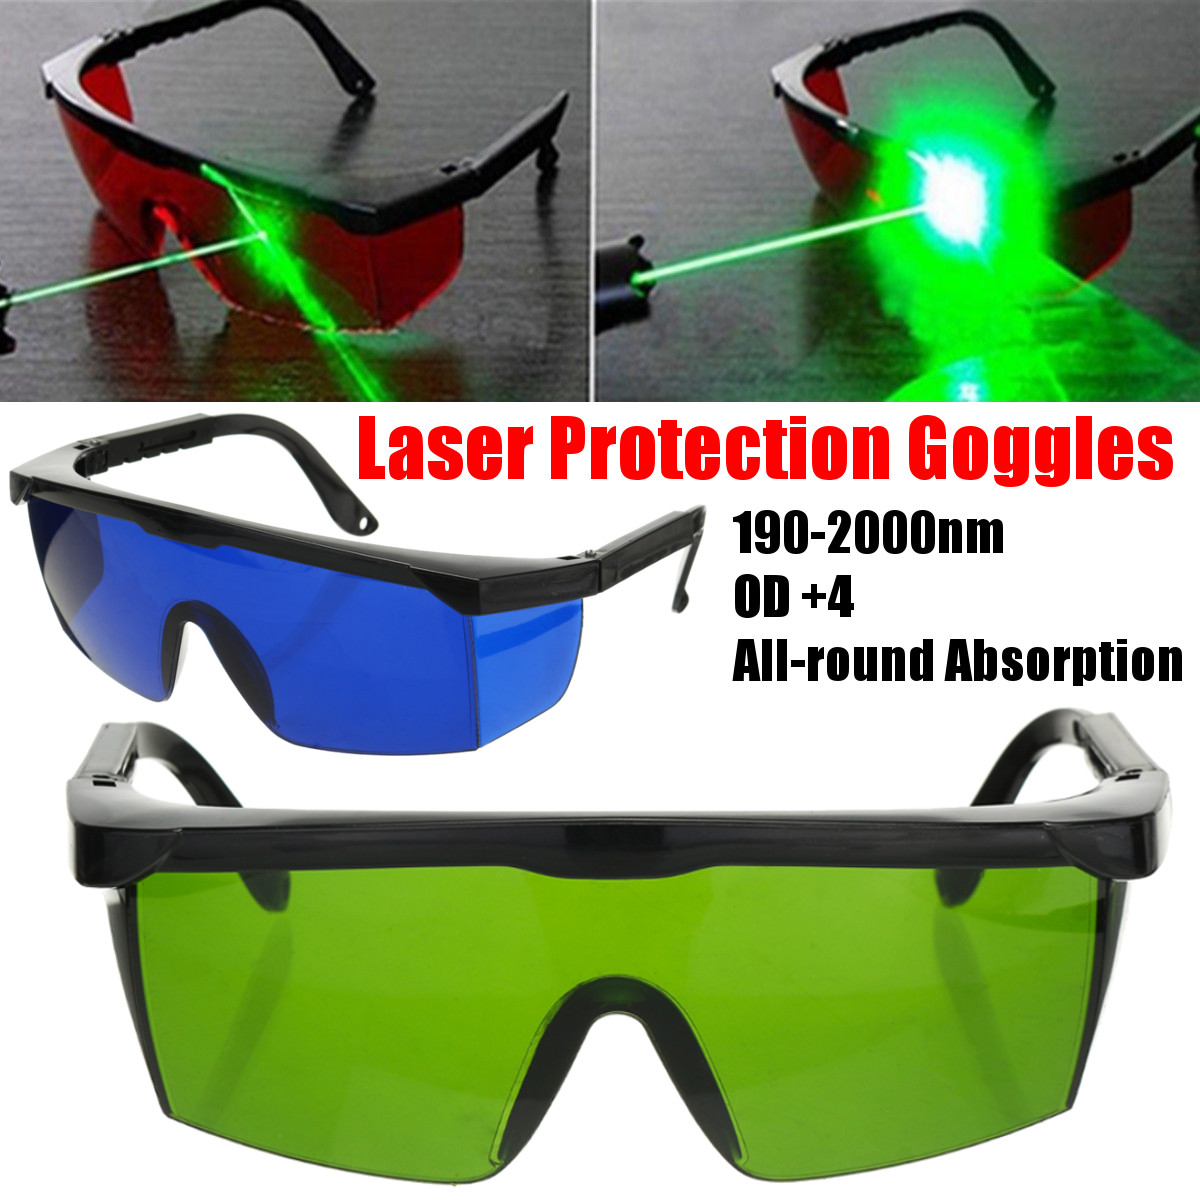 Pro Laser Protection Goggles Protective Safety Glasses Ipl Od 4d 190nm 2000nm Laser Goggles Sale